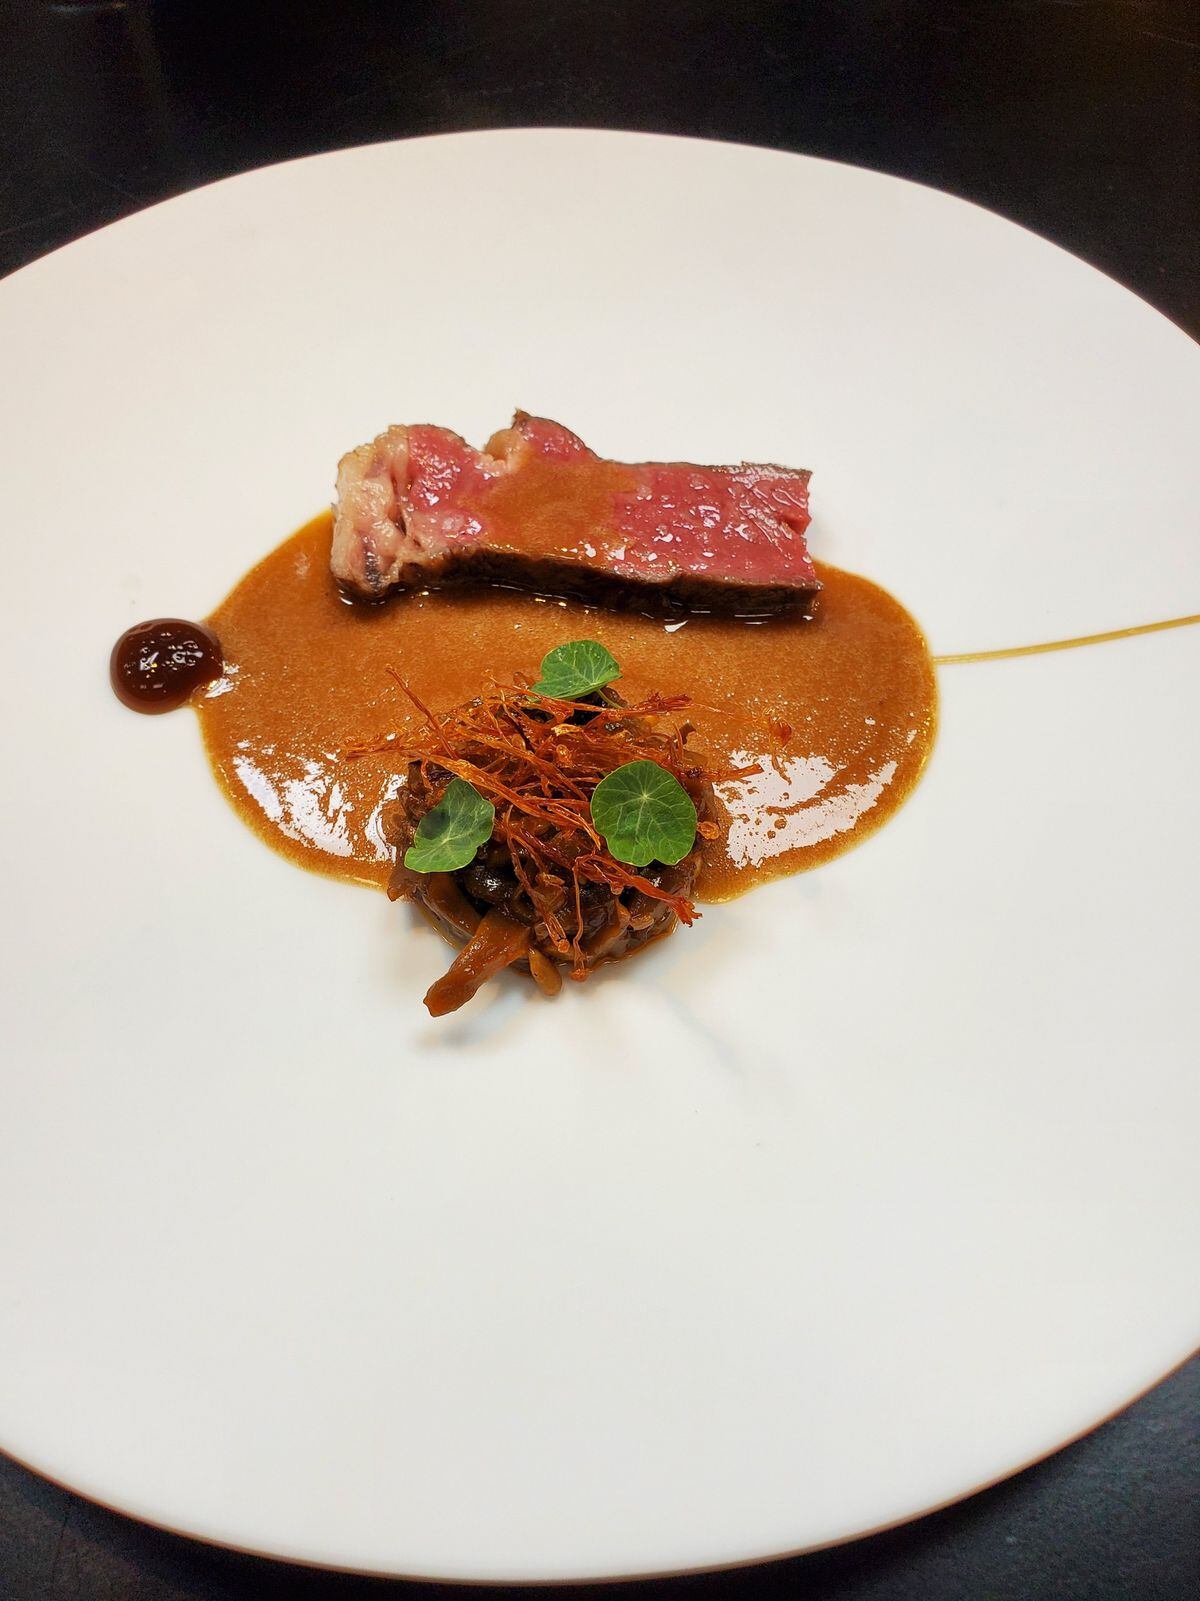 Wagyu beef with peppercorn sauce